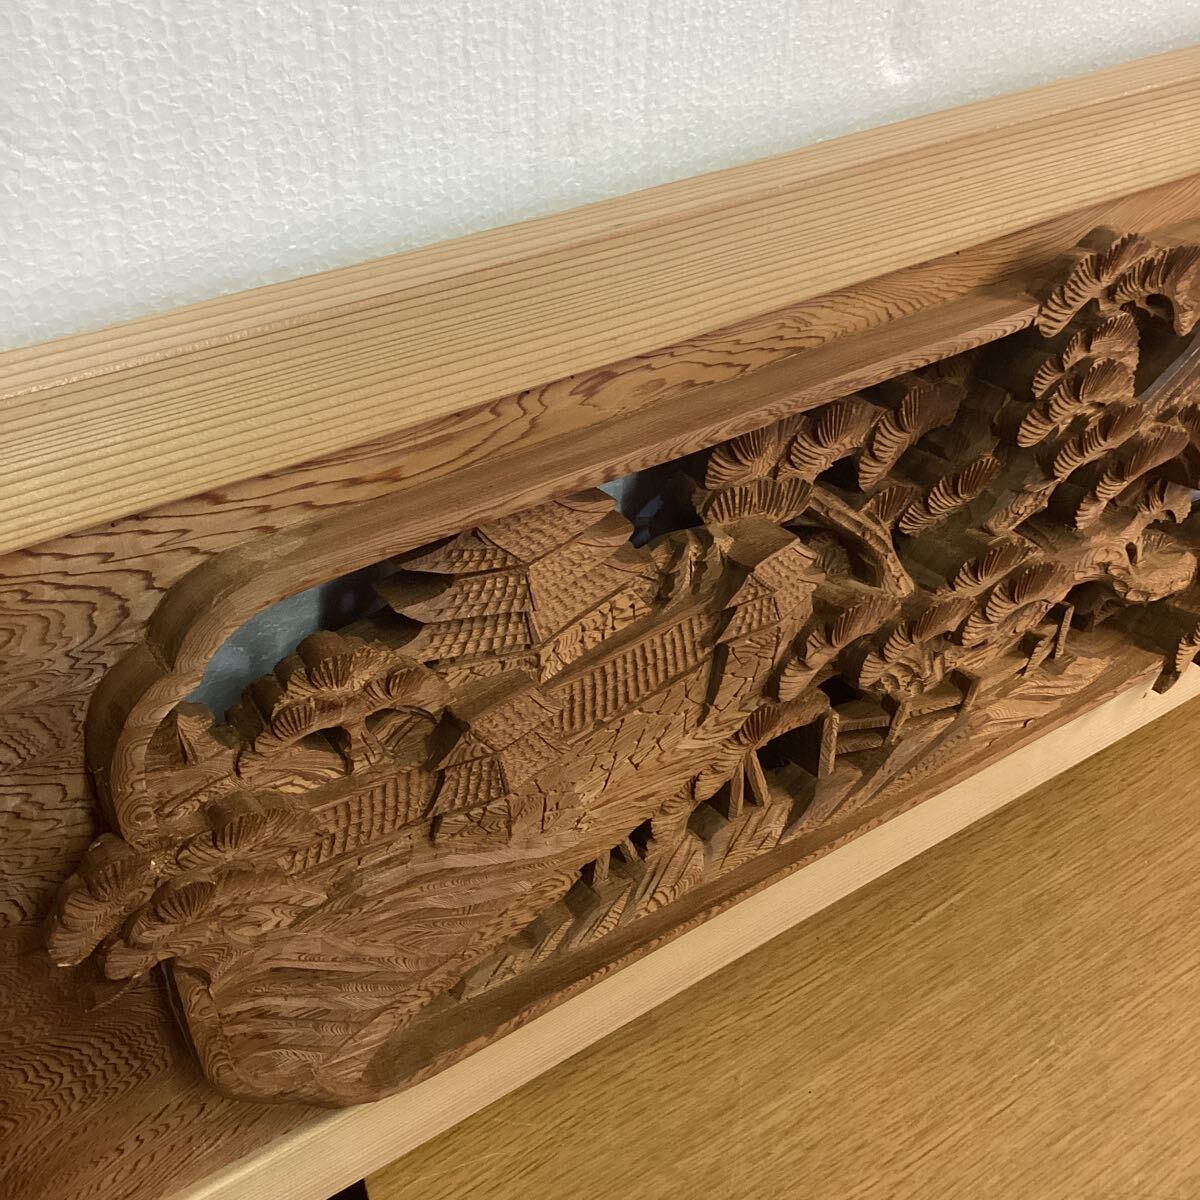 ② field interval Ranma antique wooden tree carving fittings sculpture sculpture field interval old Japanese-style house old .. interior retro 